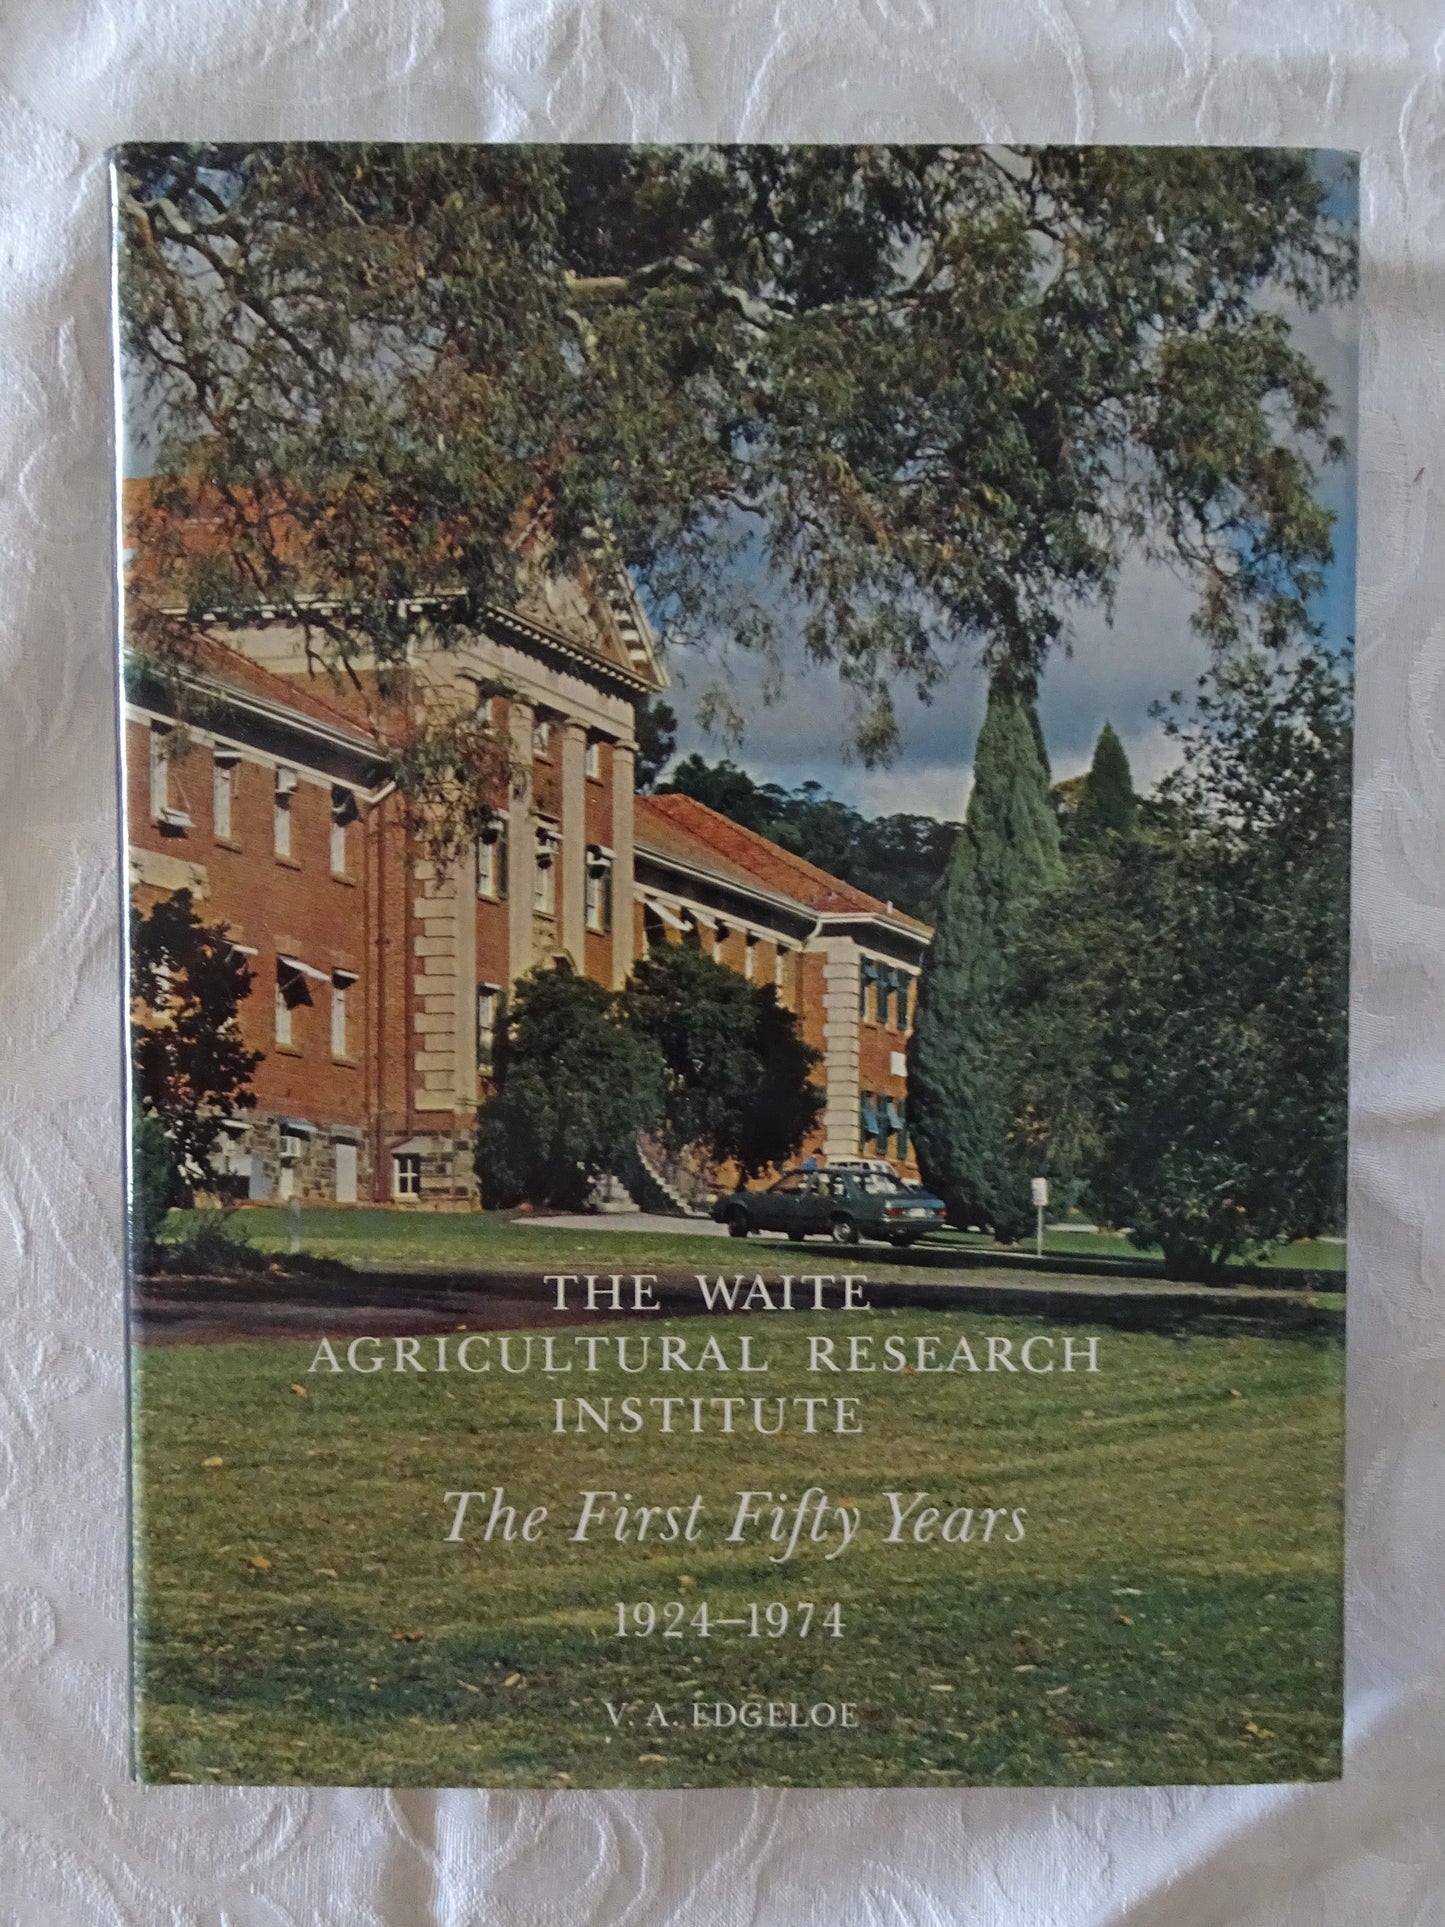 The Waite Agricultural Research Institute  The First Fifty Years 1924-1974  by V. A. Edgeloe